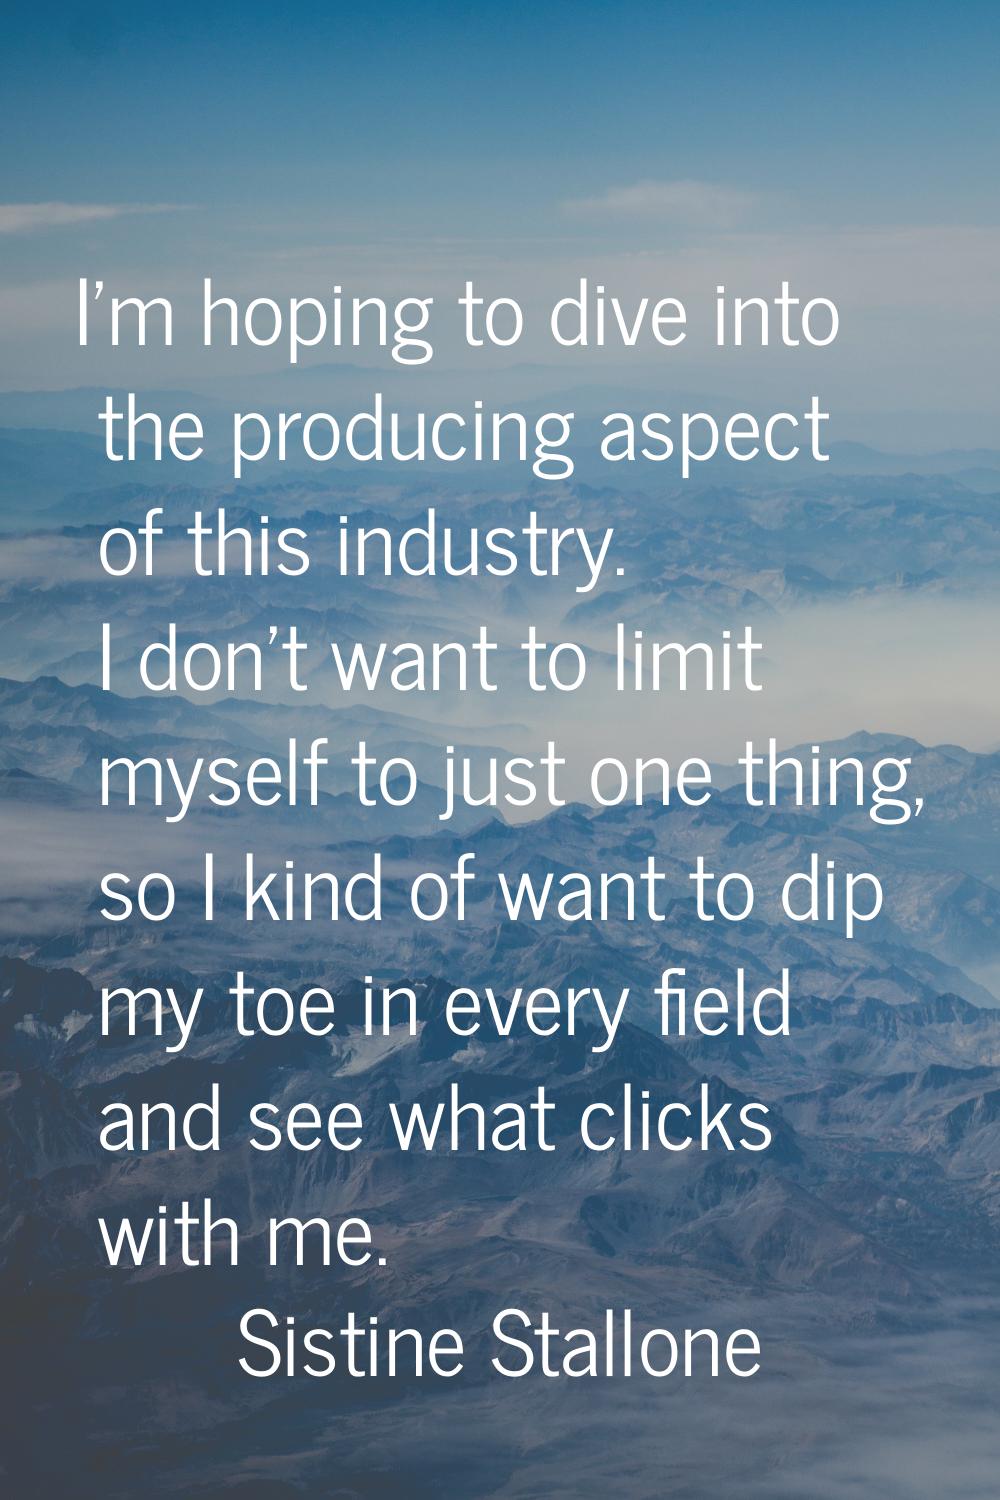 I'm hoping to dive into the producing aspect of this industry. I don't want to limit myself to just